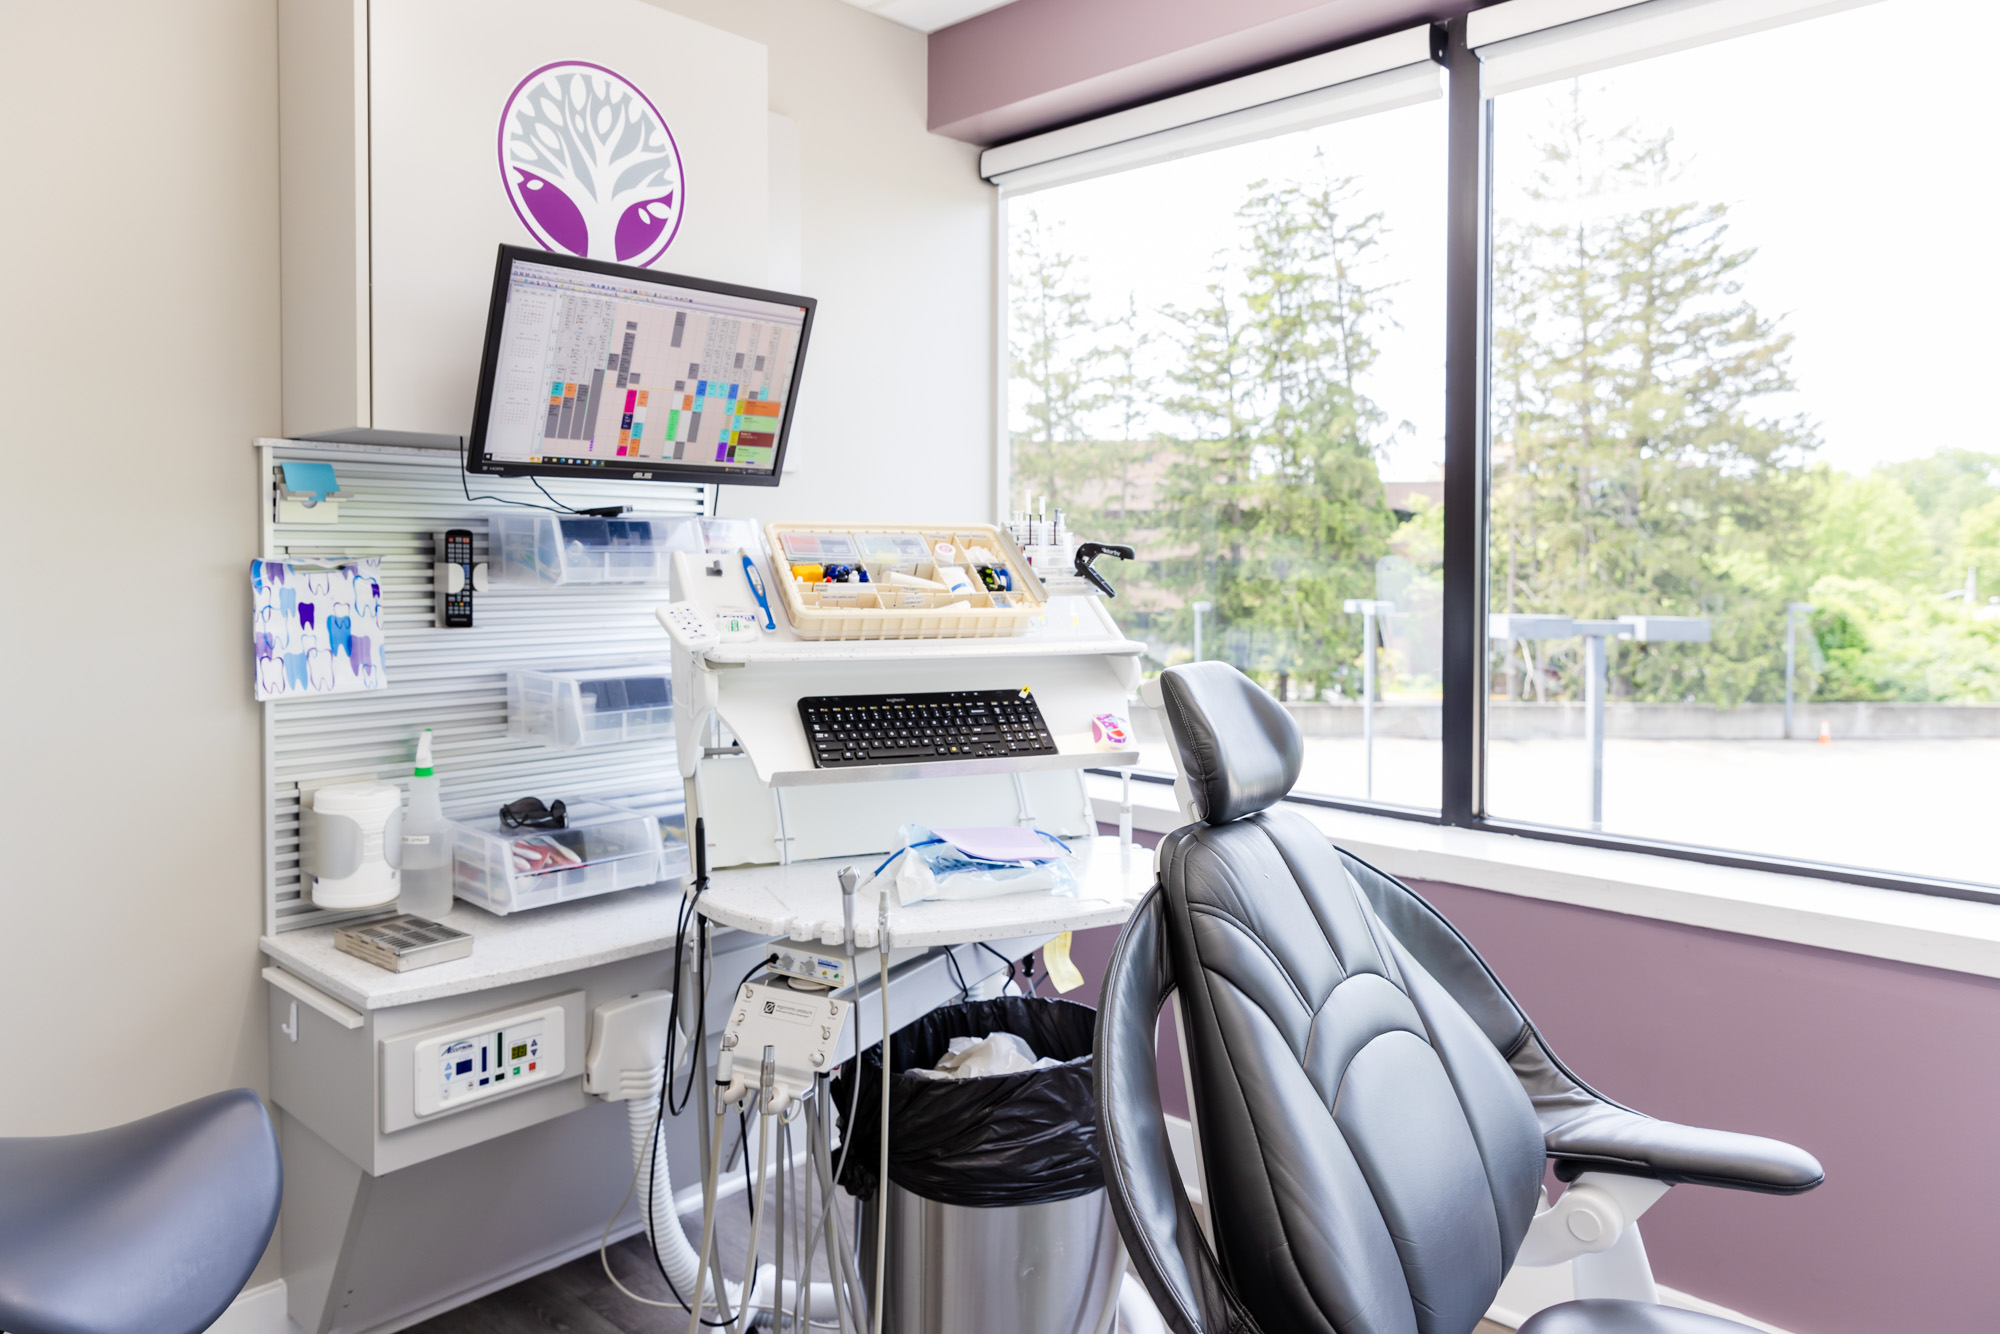 State-of-the-art dental equipment at our Fairfax dental office.